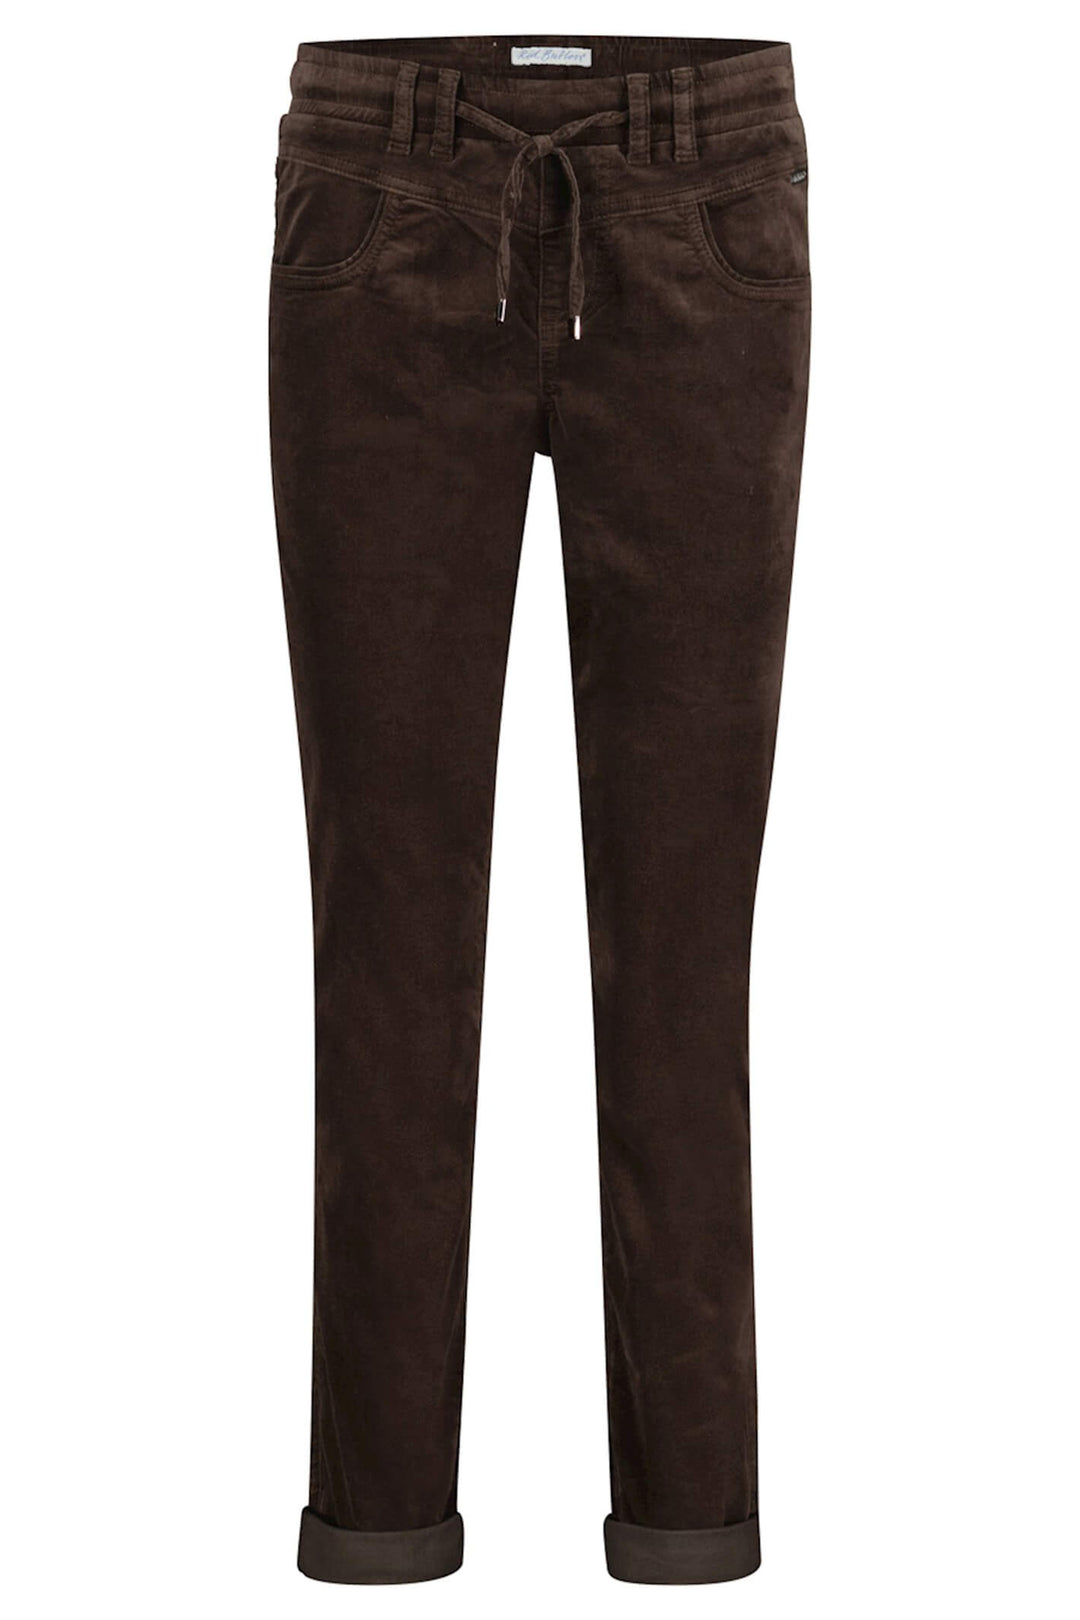 Red Button SRB4052 Tessy Espresso Brown Velvet Pull-On Trousers - Dotique